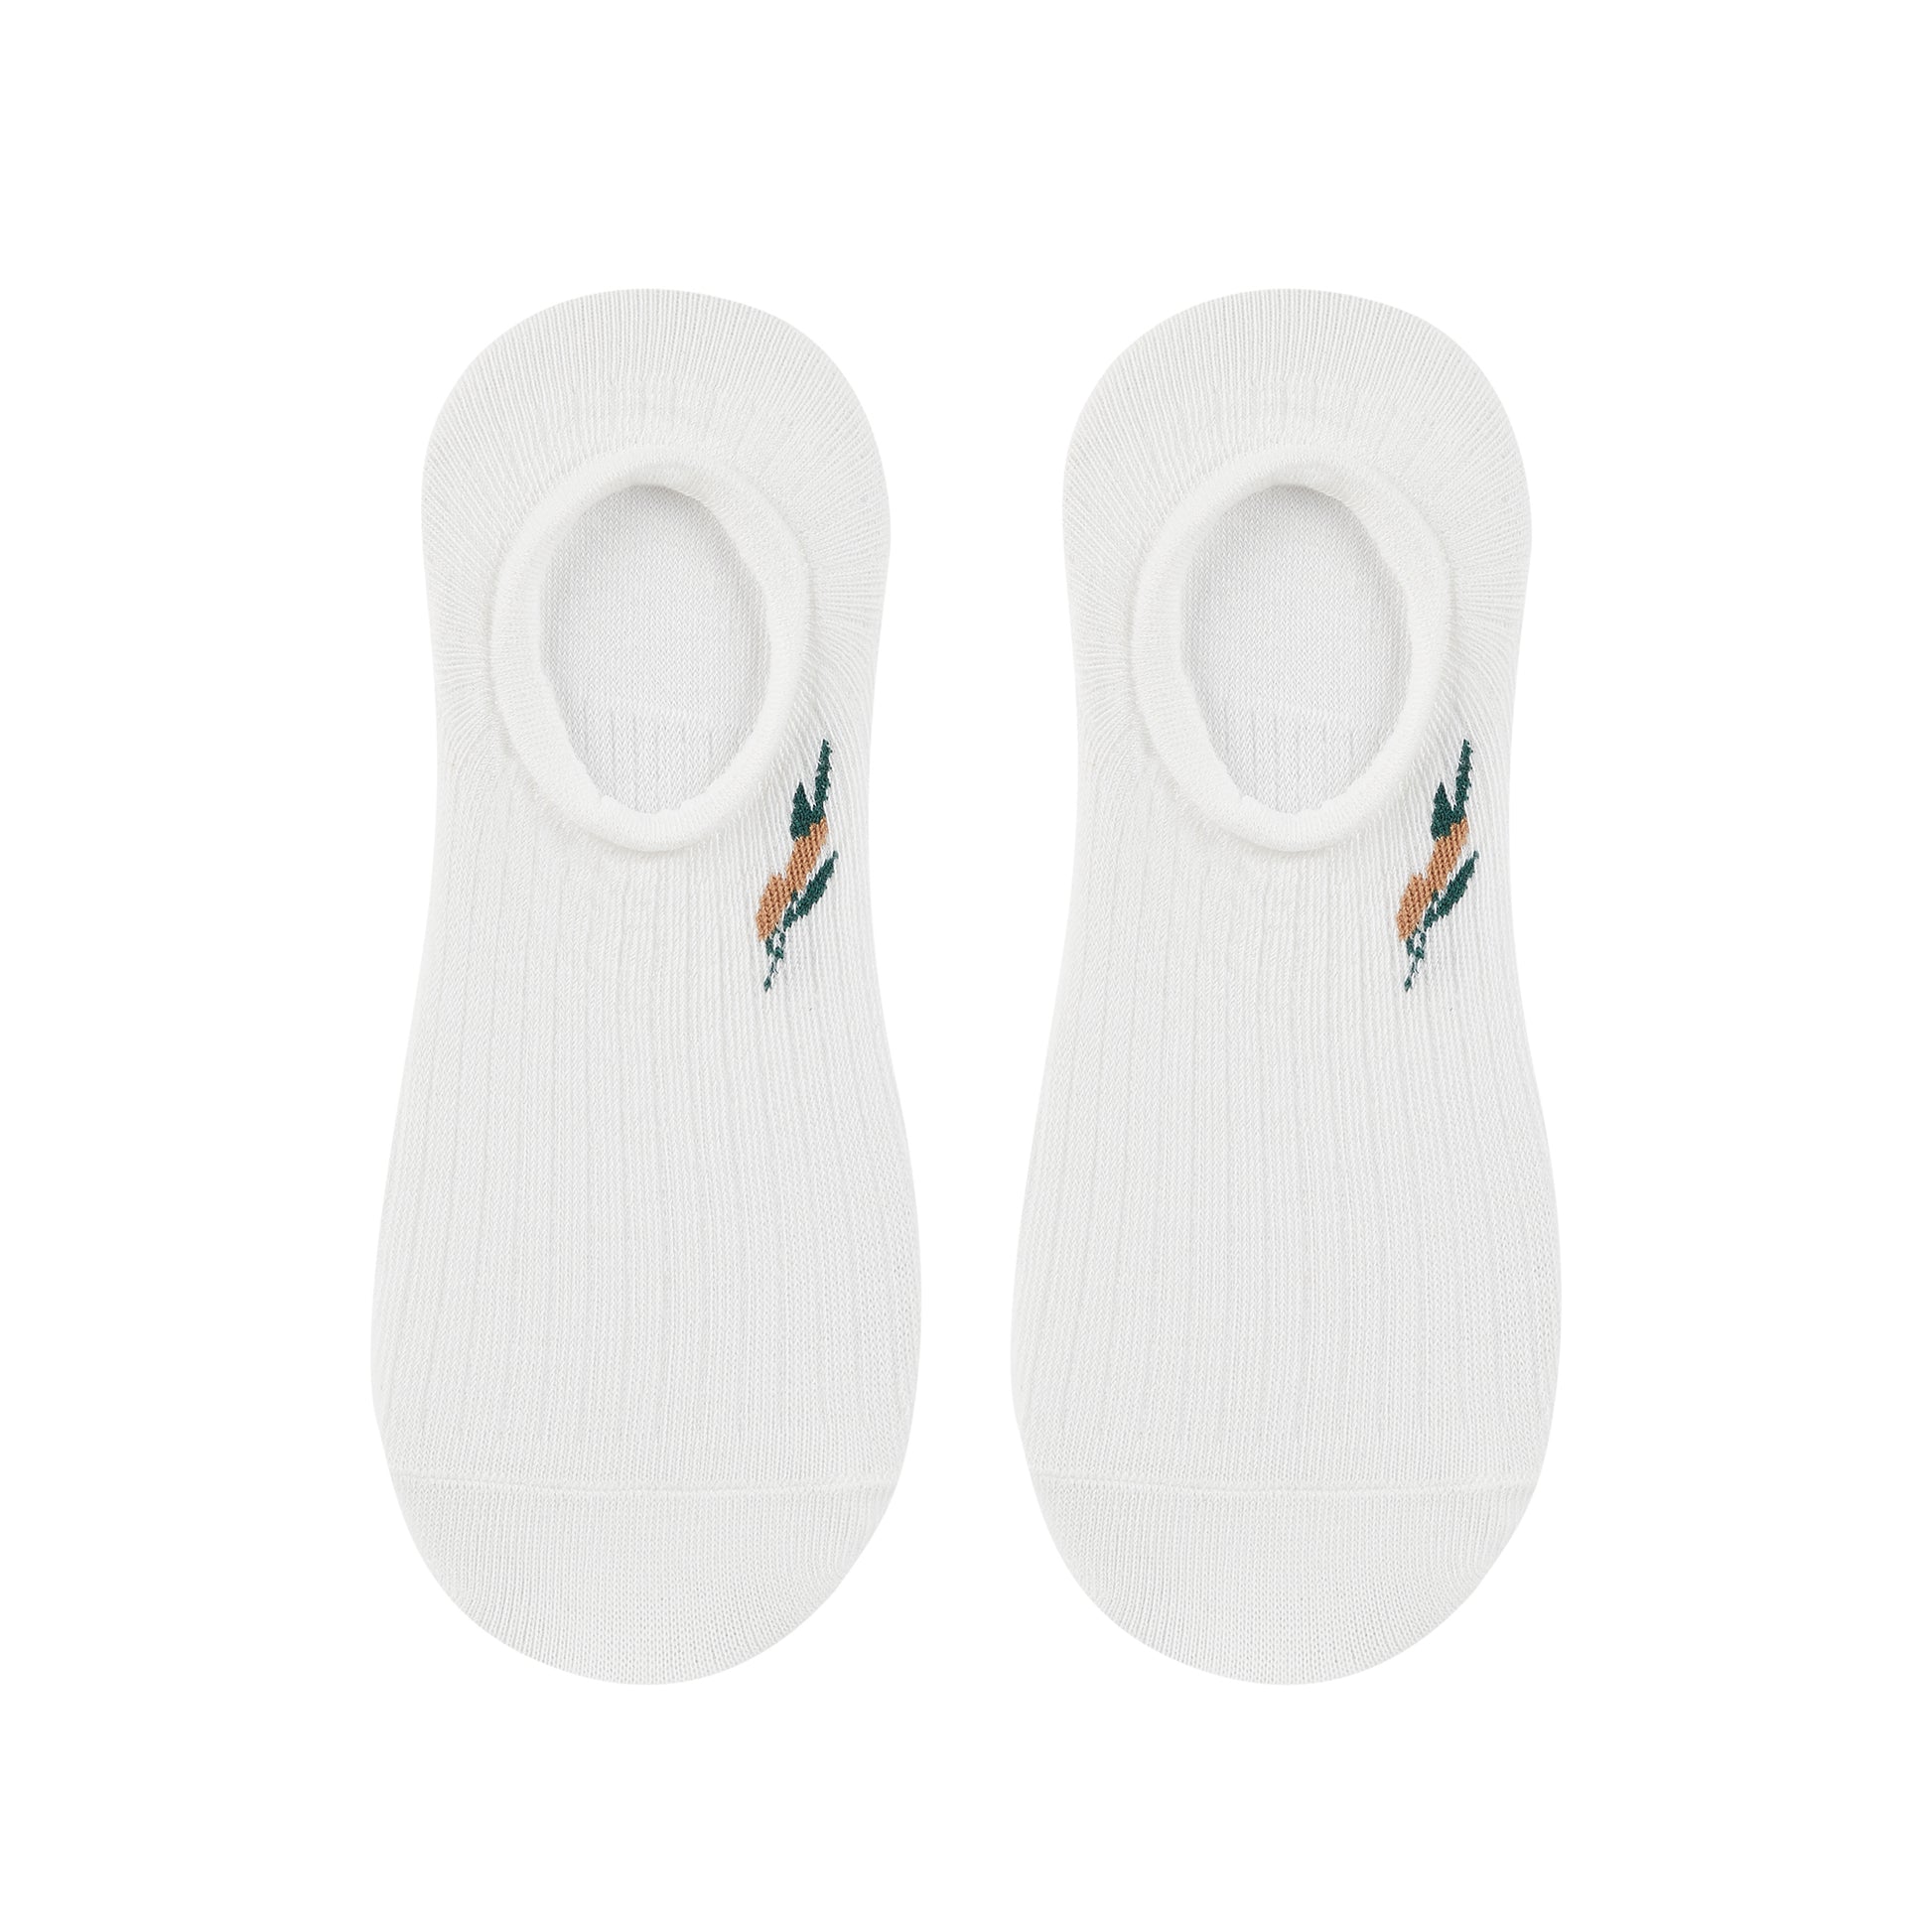 Women's Plain White Invisible Foot Socks with Print - IDENTITY Apparel Shop